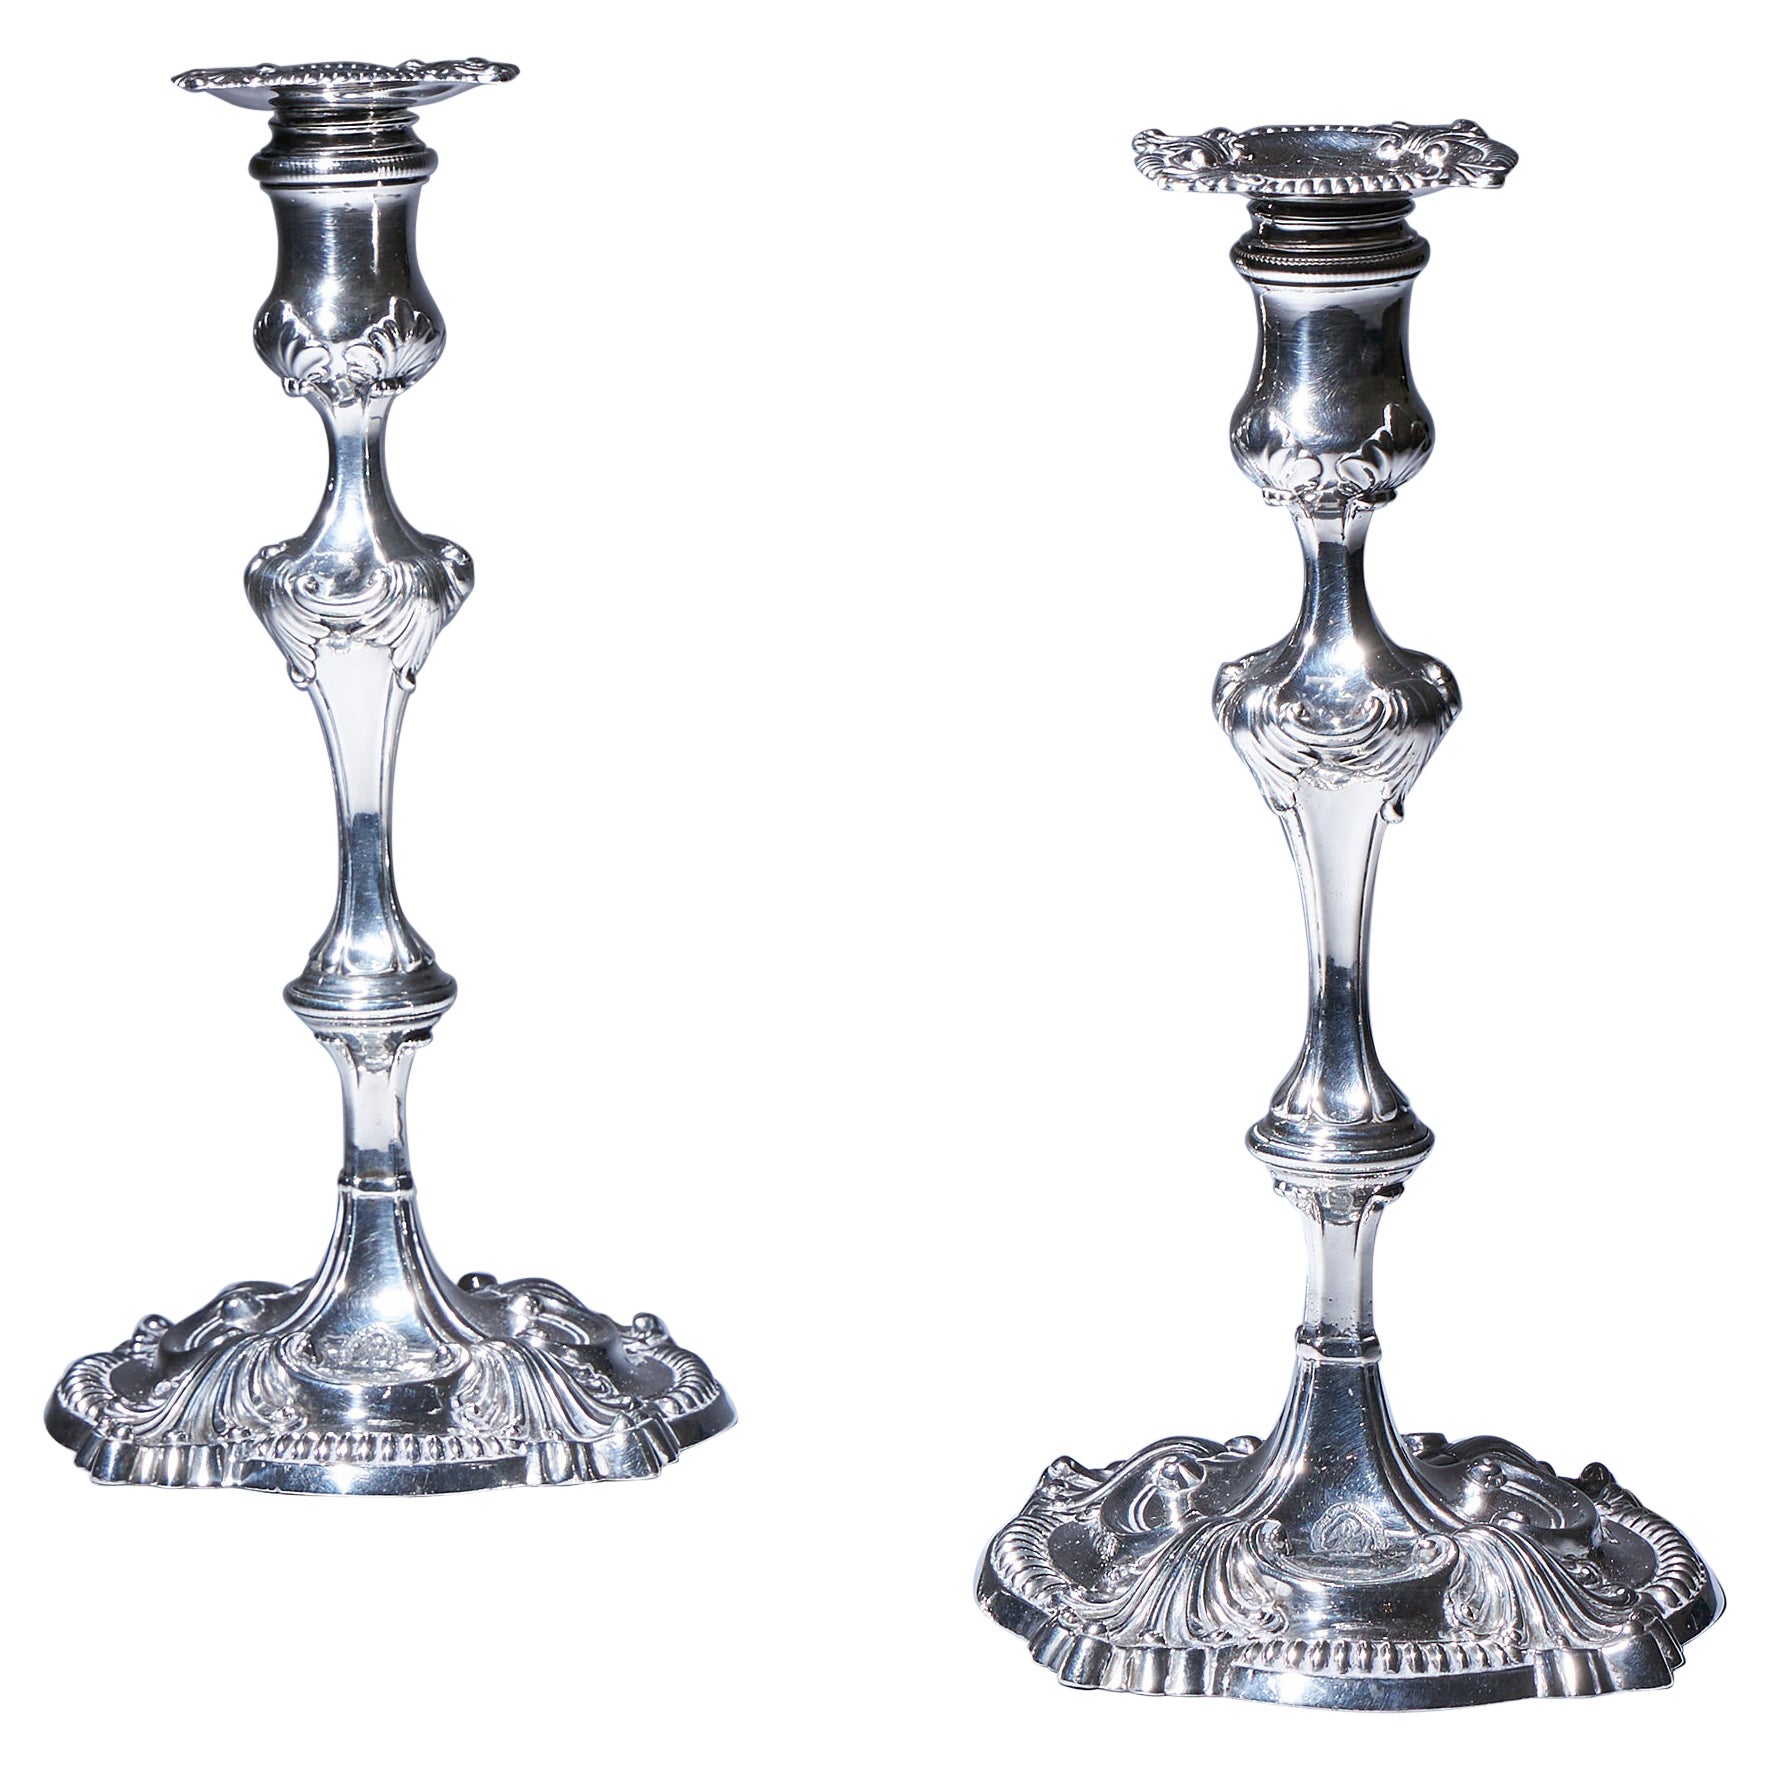 Pair of 18th Century George III Silver Candlesticks by David Bell, London, 1762 For Sale